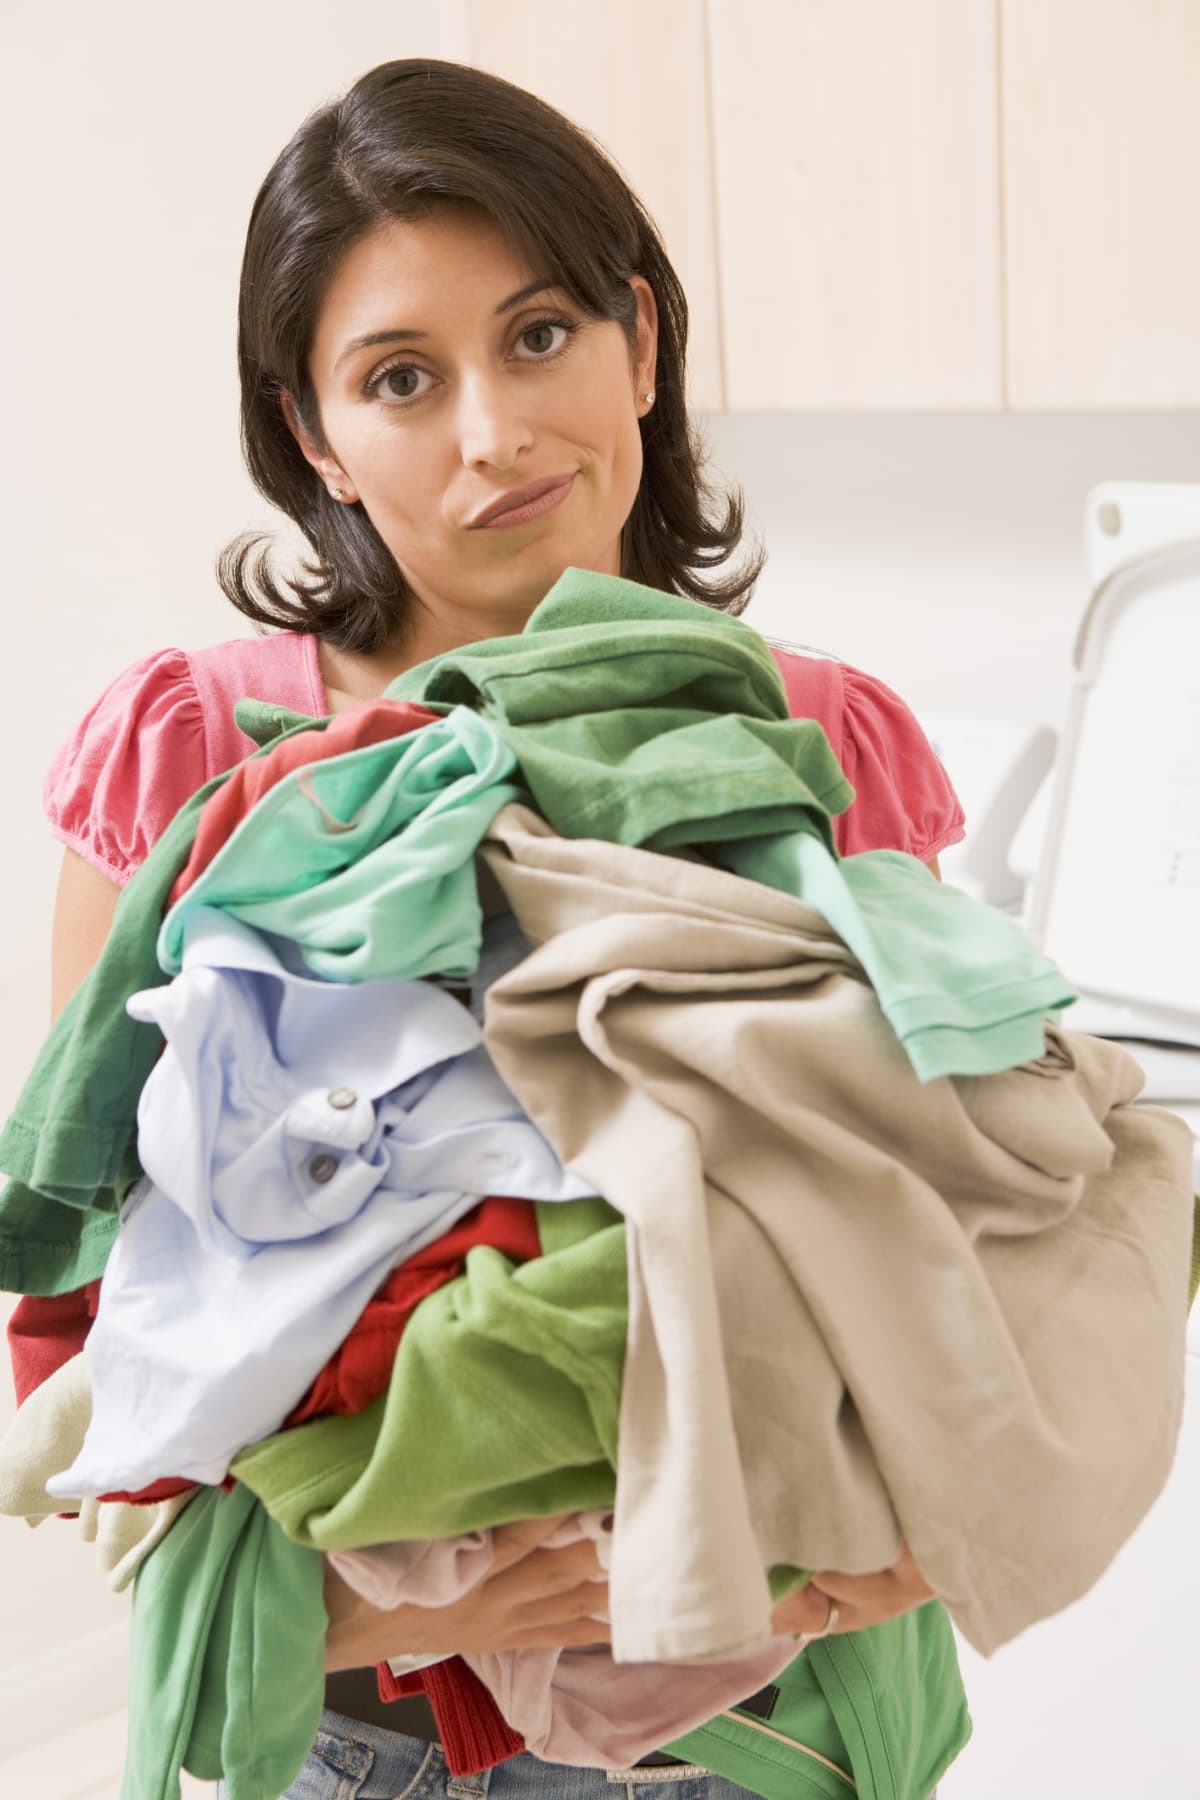 A frowning woman holding an armful of laundry